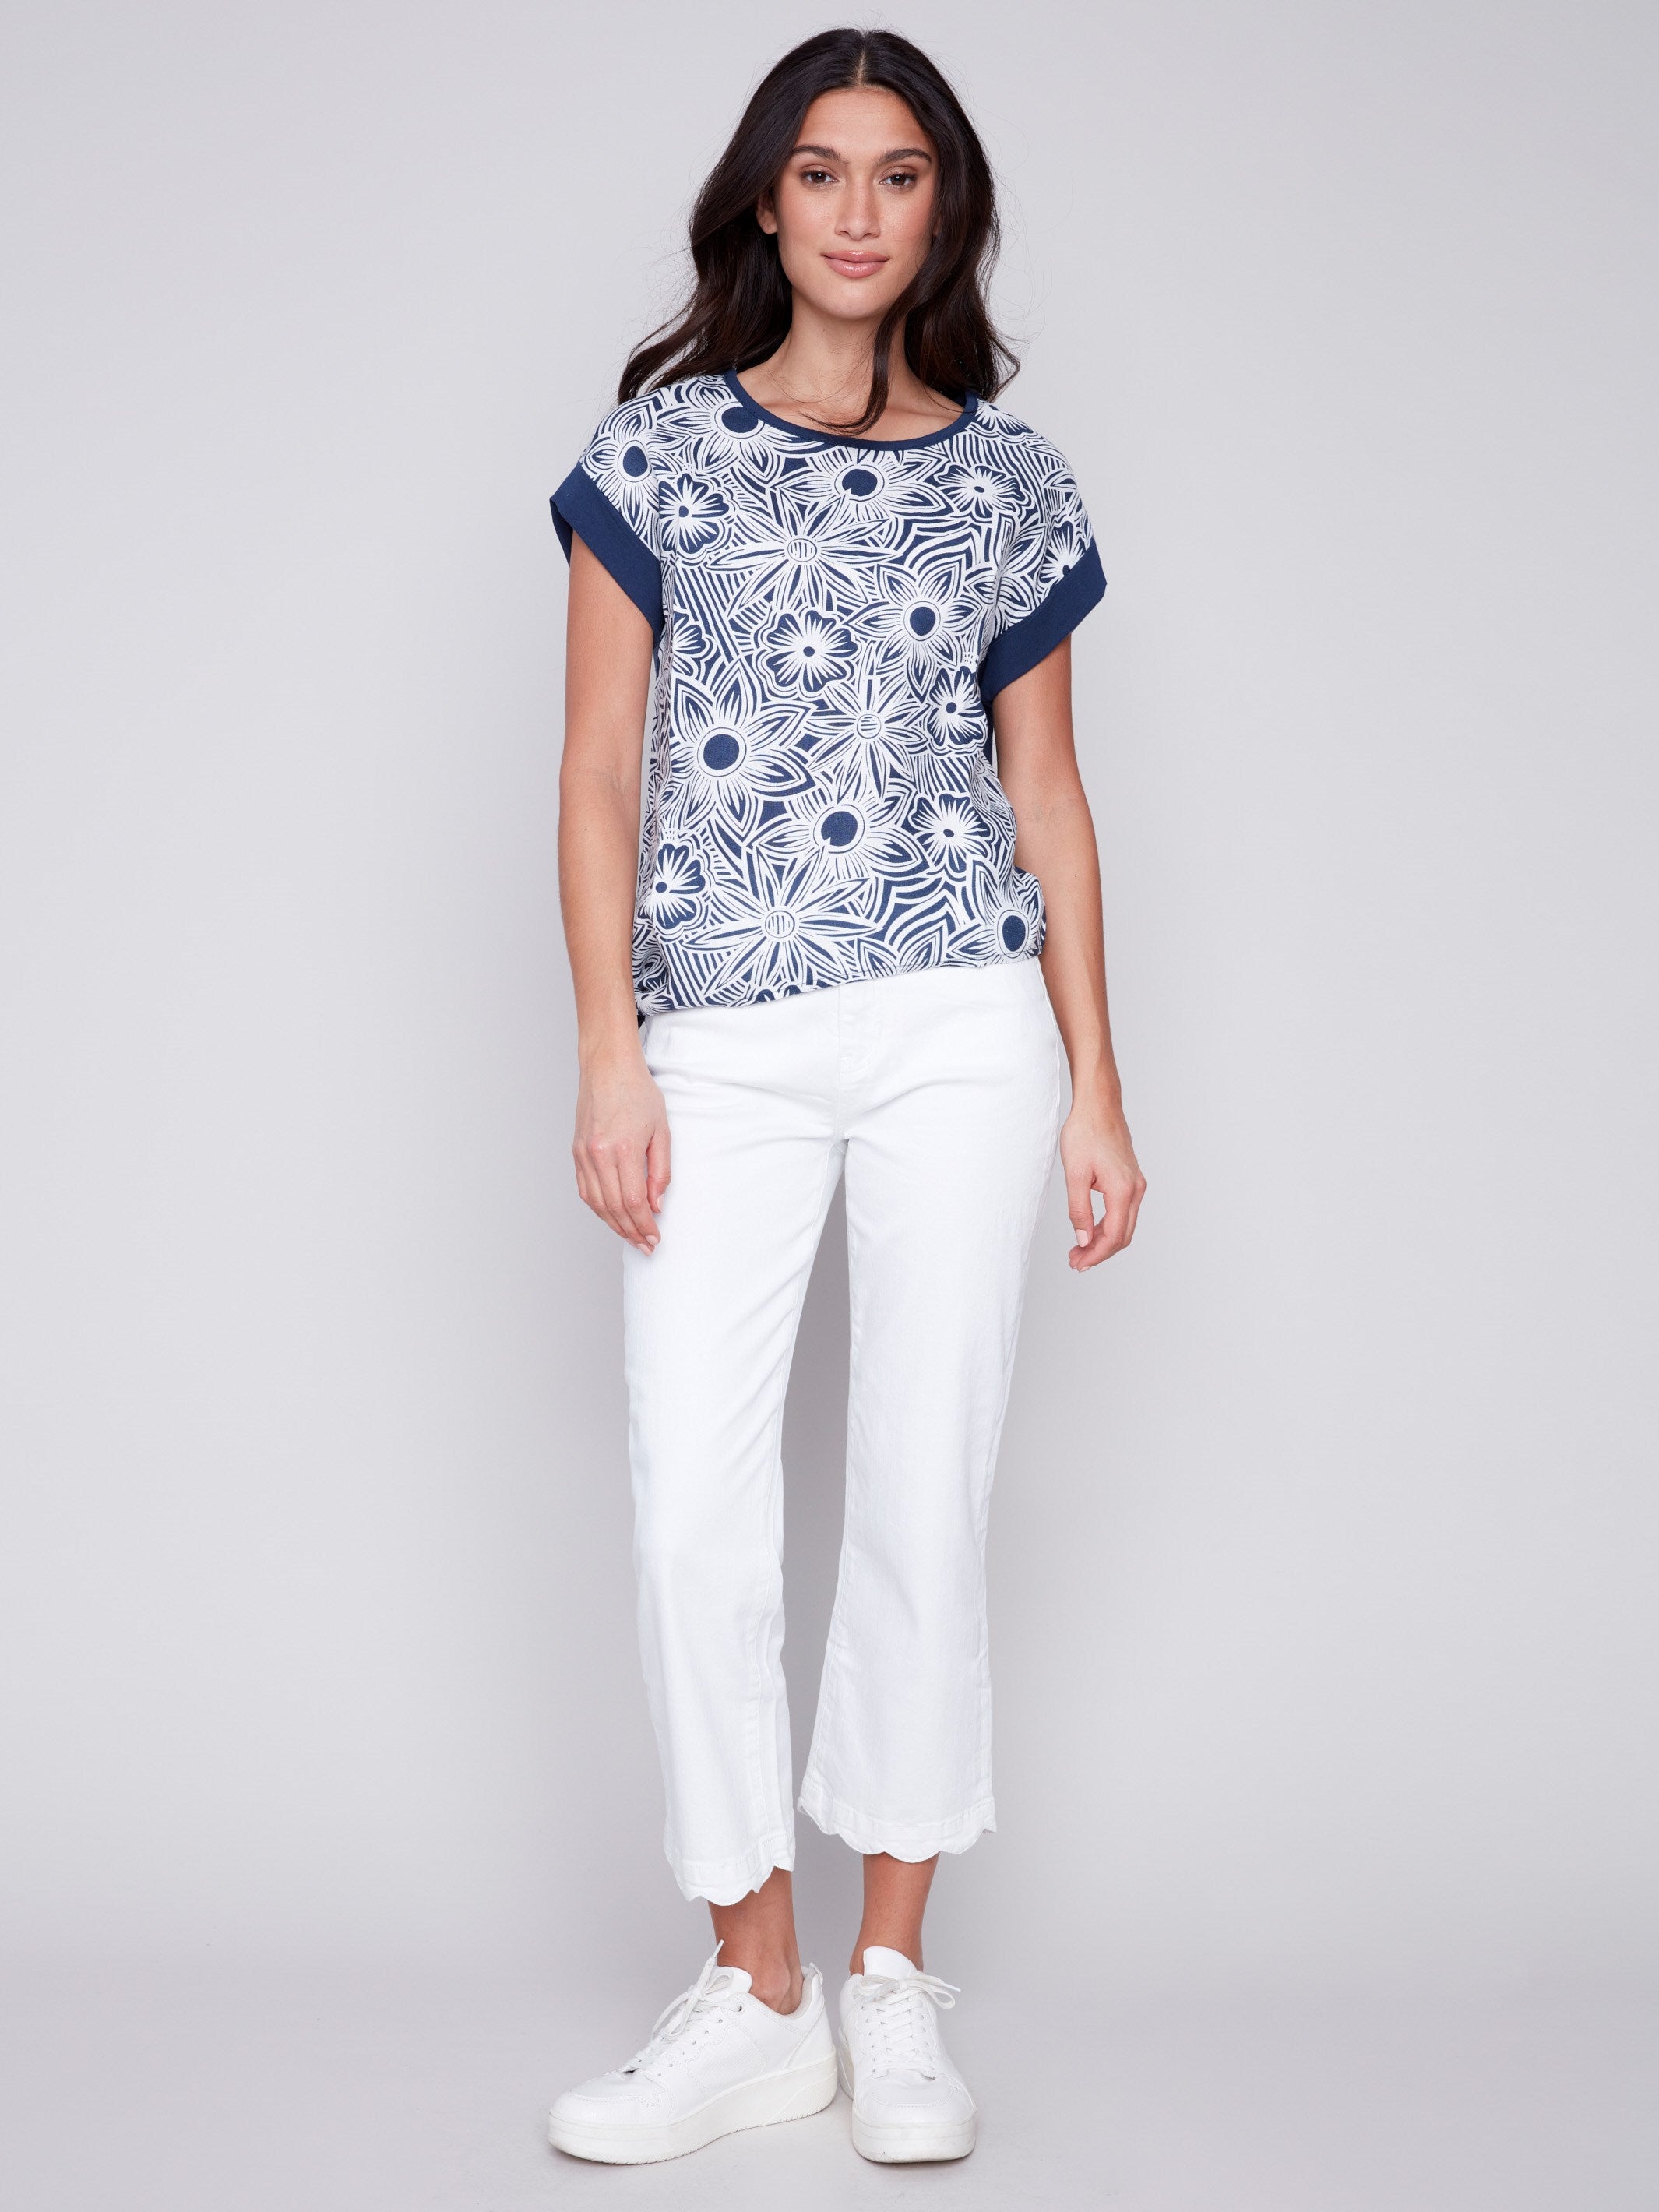 Printed Linen Top with Side Tie - Navy - Charlie B Collection Canada - Image 3